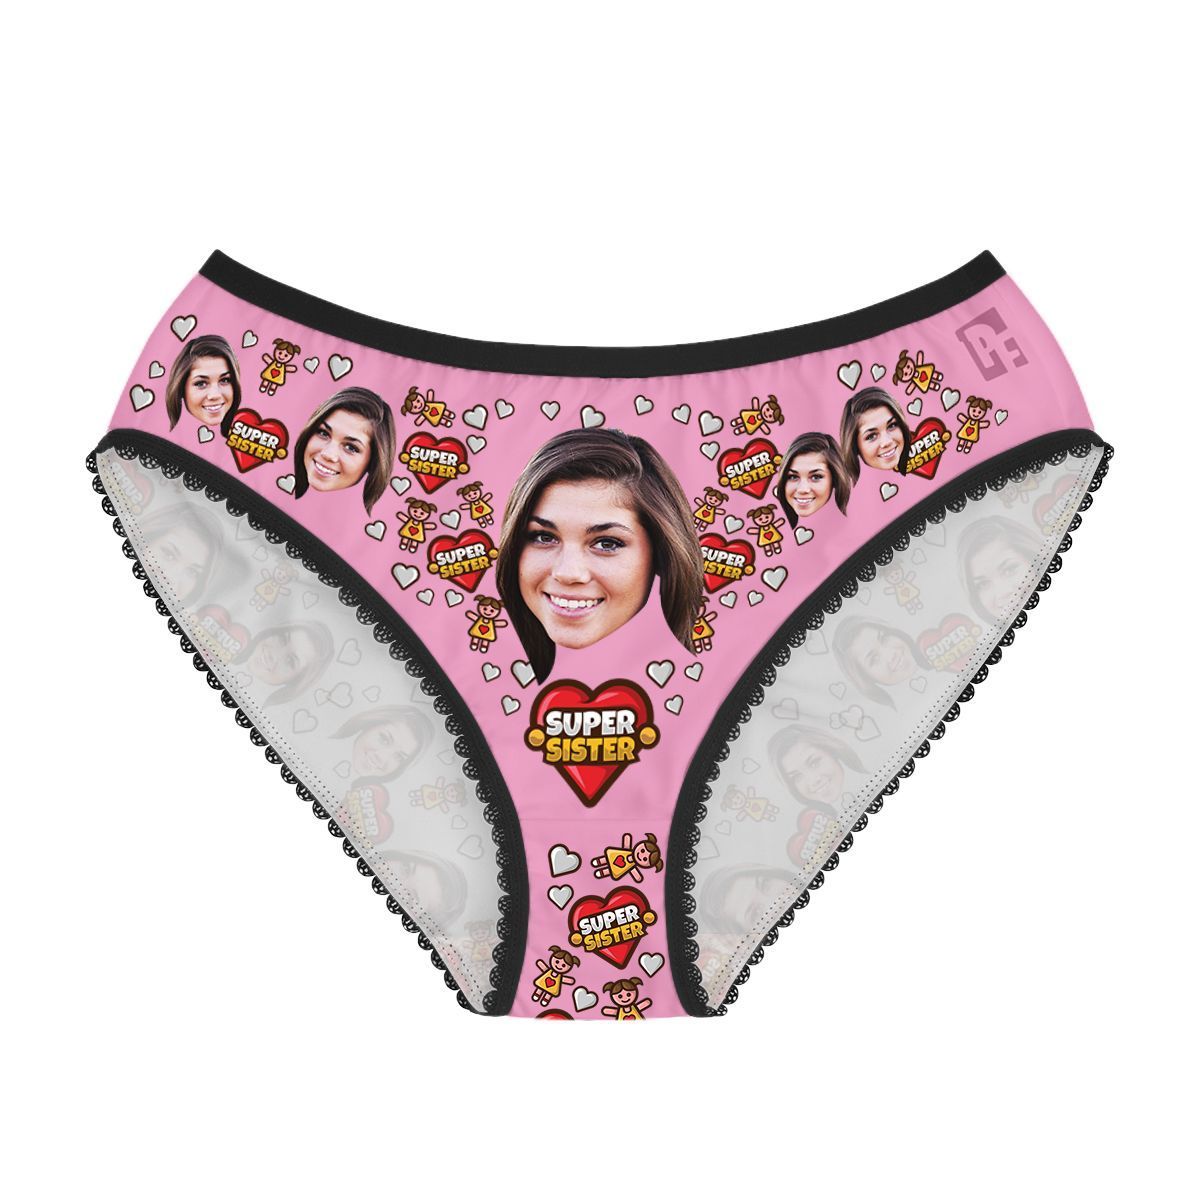 Red Super Sister women's underwear briefs personalized with photo printed on them